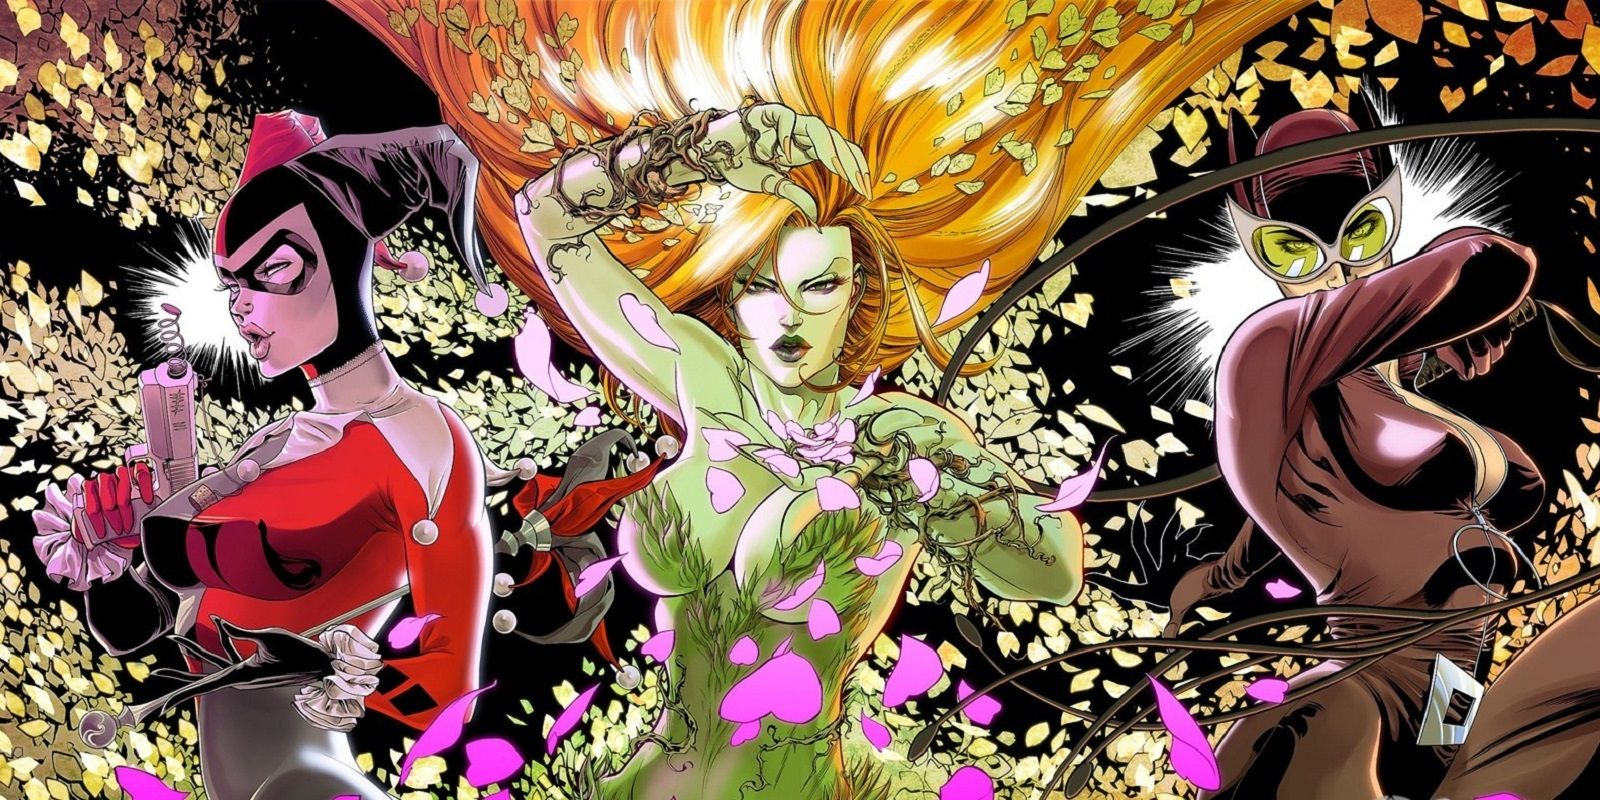 Harley Quinn, Poison Ivy, and Catwoman, part of the Gotham City Sirens in Dc Comics.